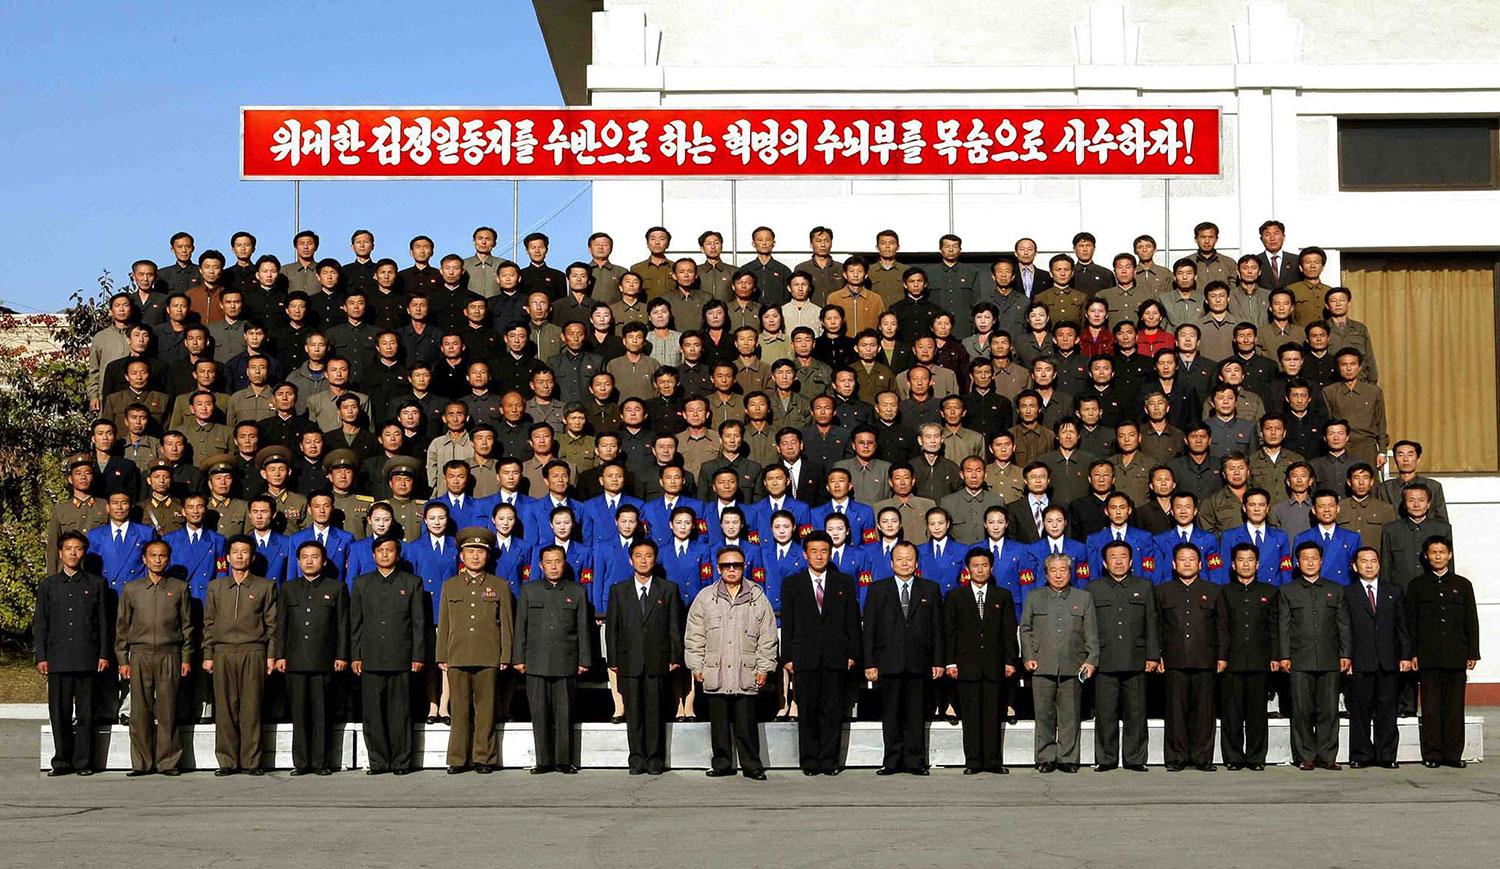 This undated photo, released by KCNA on Oct. 25, 2009, shows Kim Jong Il (center, in sunglasses) posing with staff of the Youth Electric Complex in Huichon.